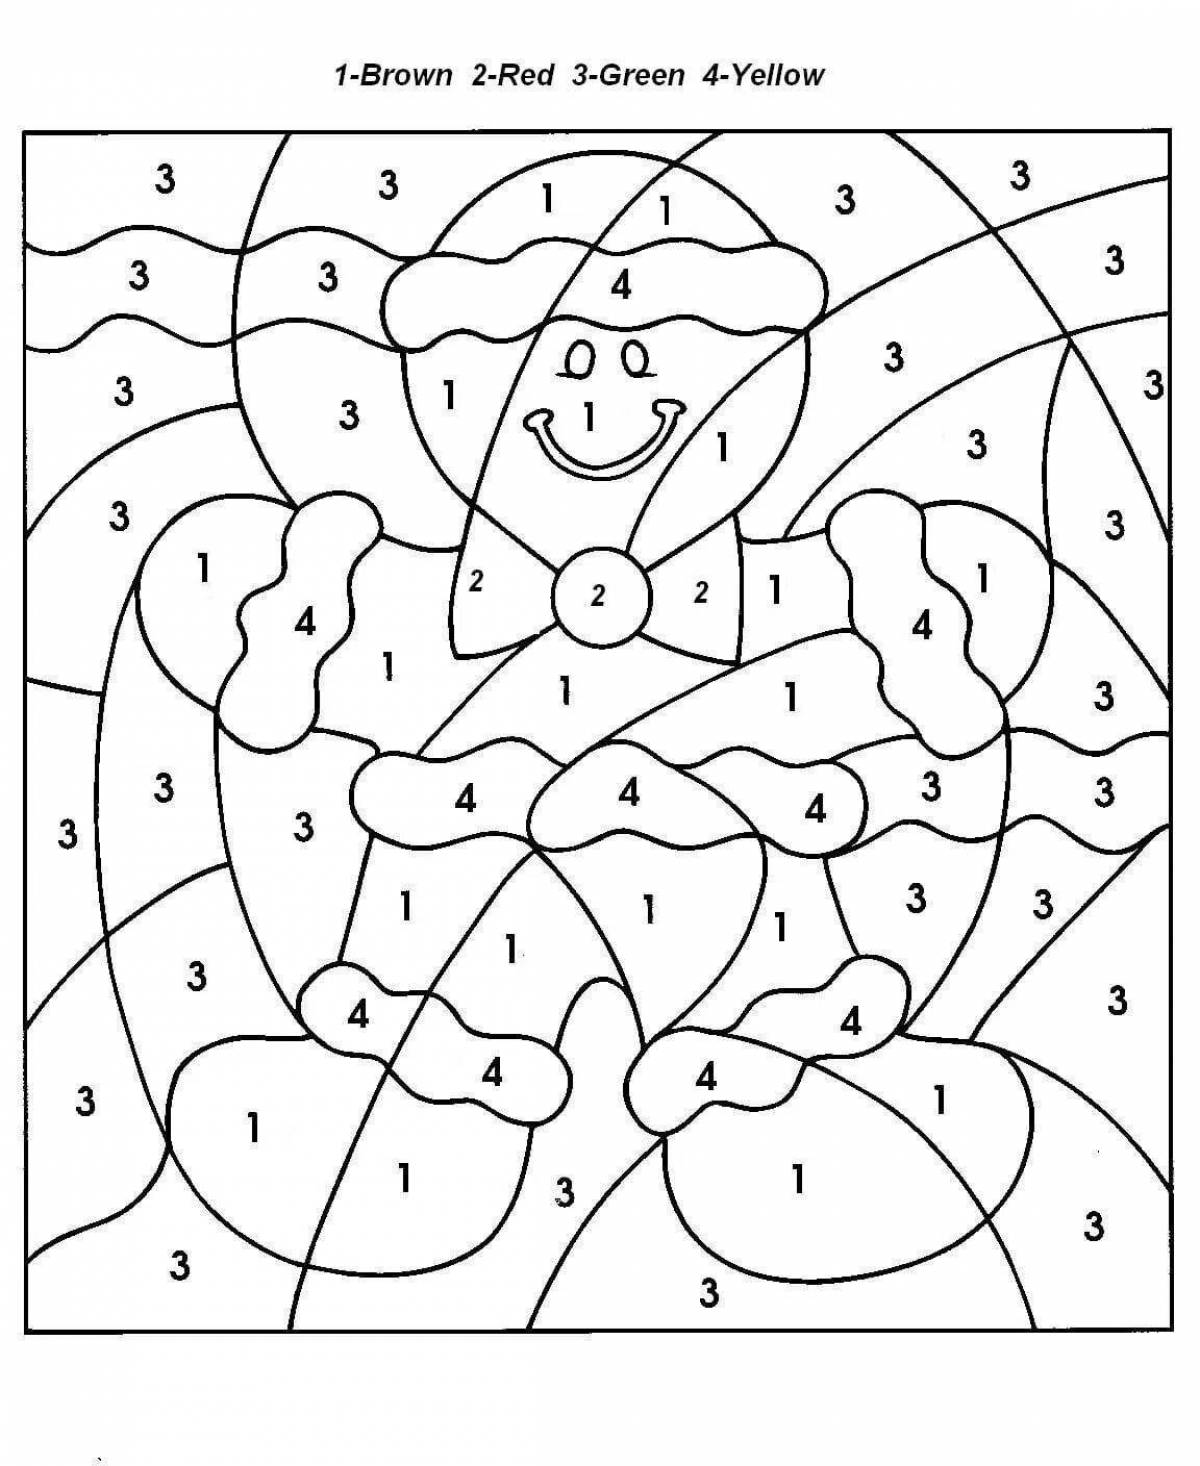 Creative art coloring games with numbers